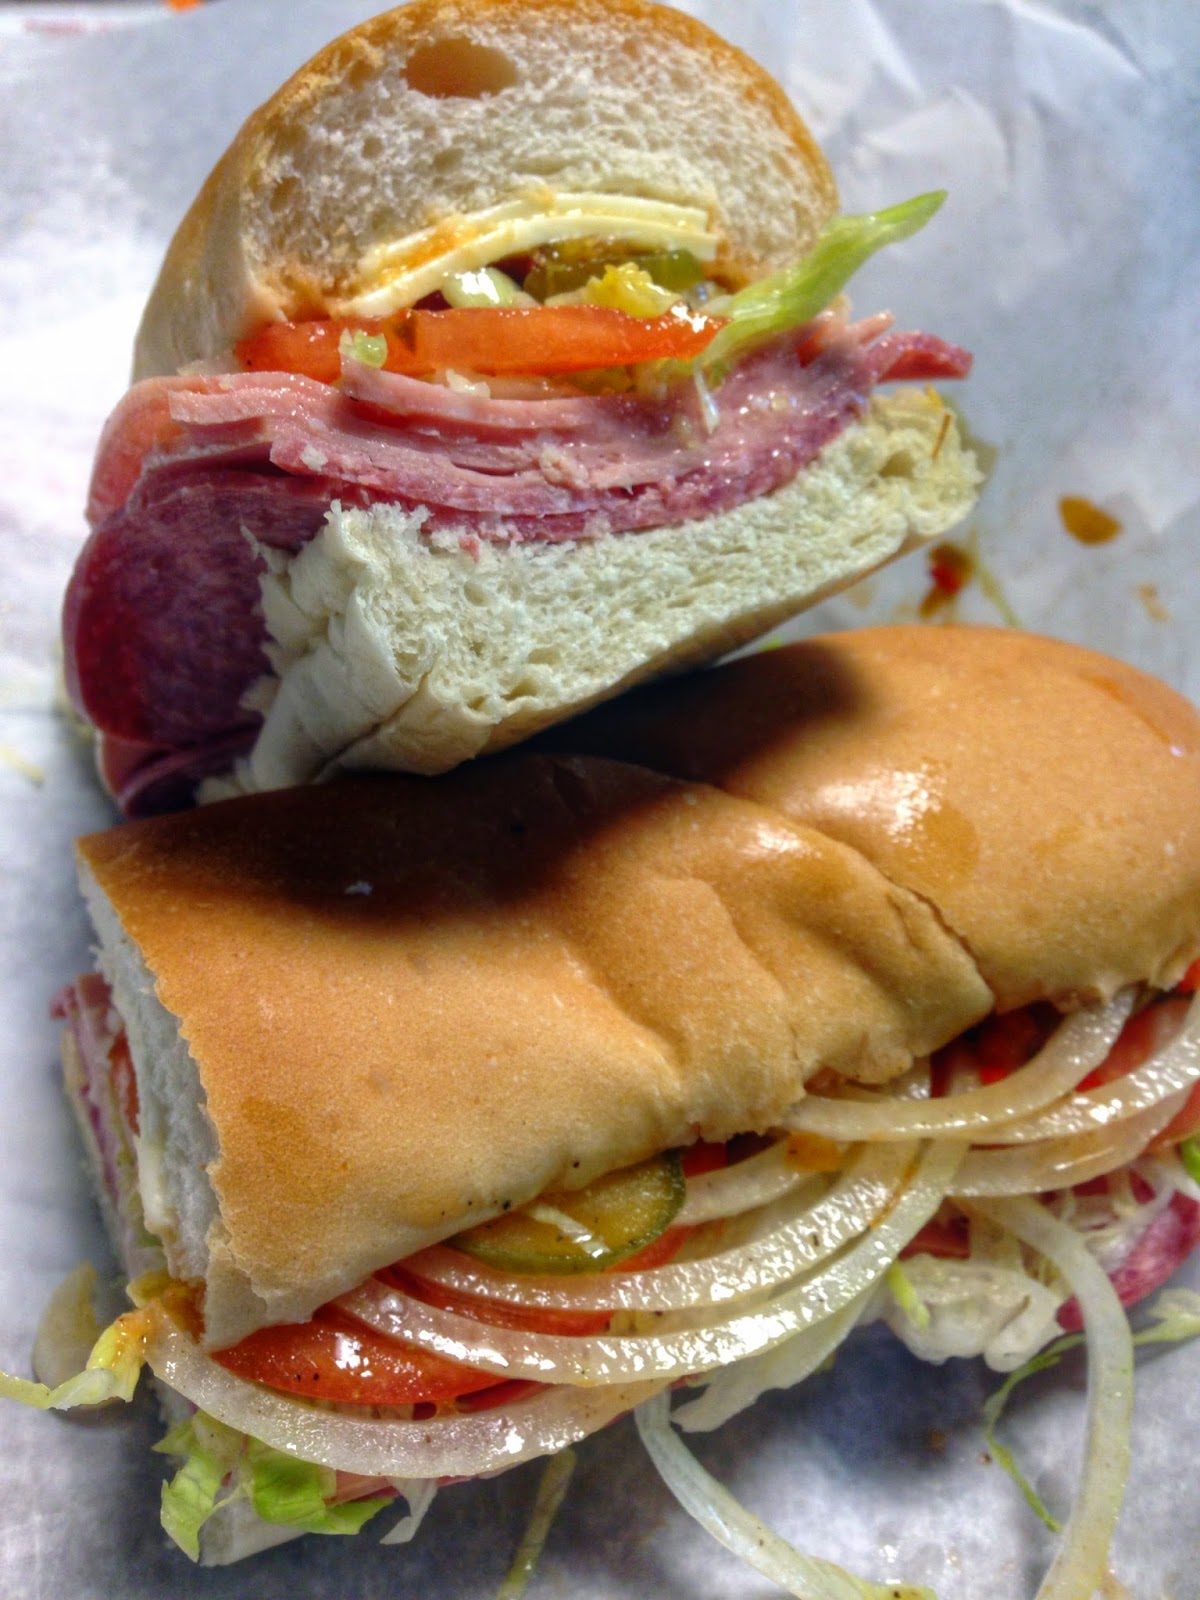 Subs and Stuff - The Quest for the Best Italian Sub in Boston: Betty Ann's Sub Shop - Danvers, MA